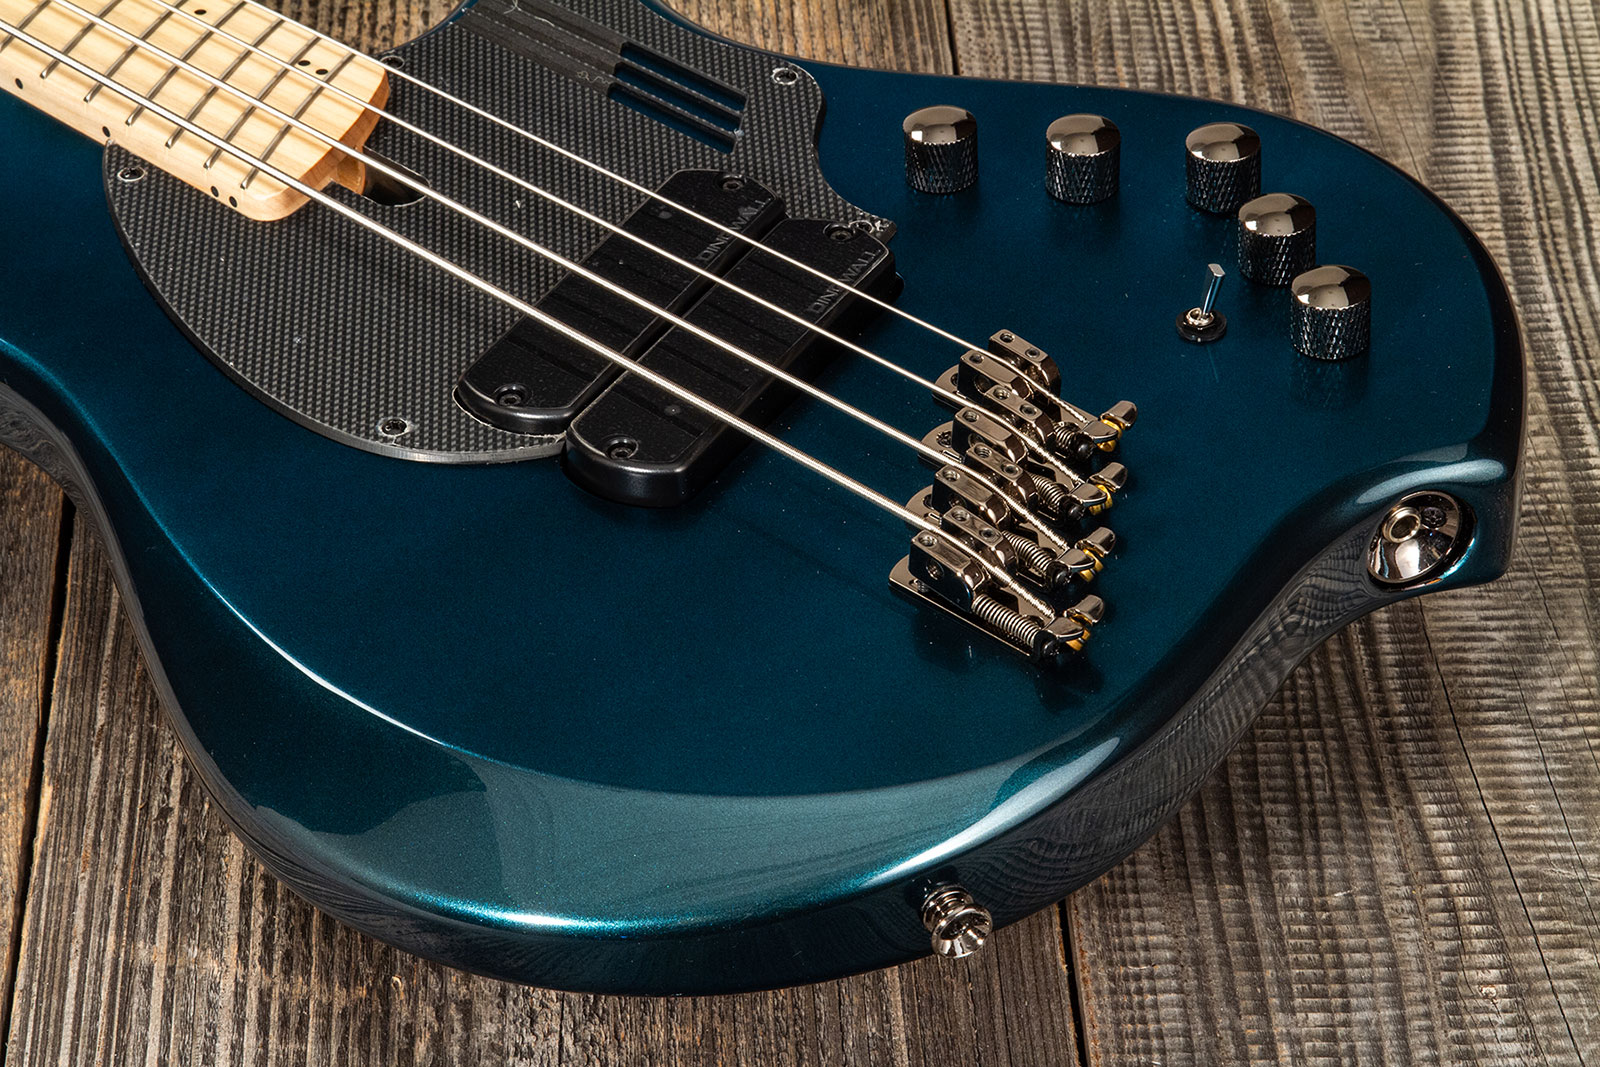 Dingwall Adam Nolly Getgood Ng2 4c Signature 2pu Active Mn - Black Forest Green - Solid body electric bass - Variation 4